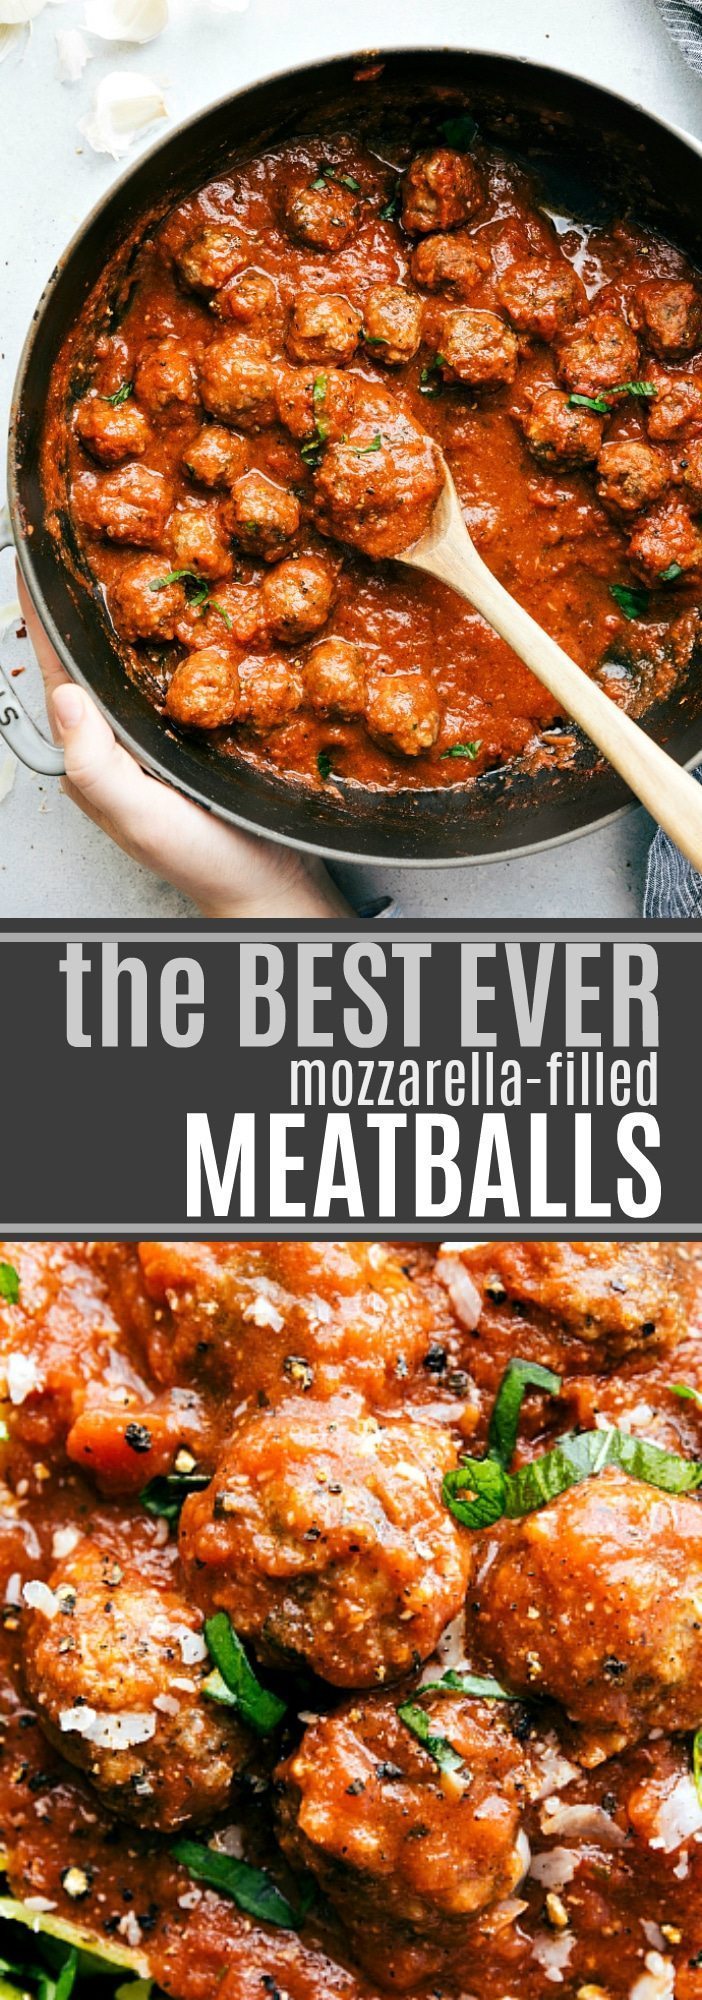 The ultimate BEST EVER meatballs filled with mozzarella. Read the rave reviews!! via chelseasmessyapron.com